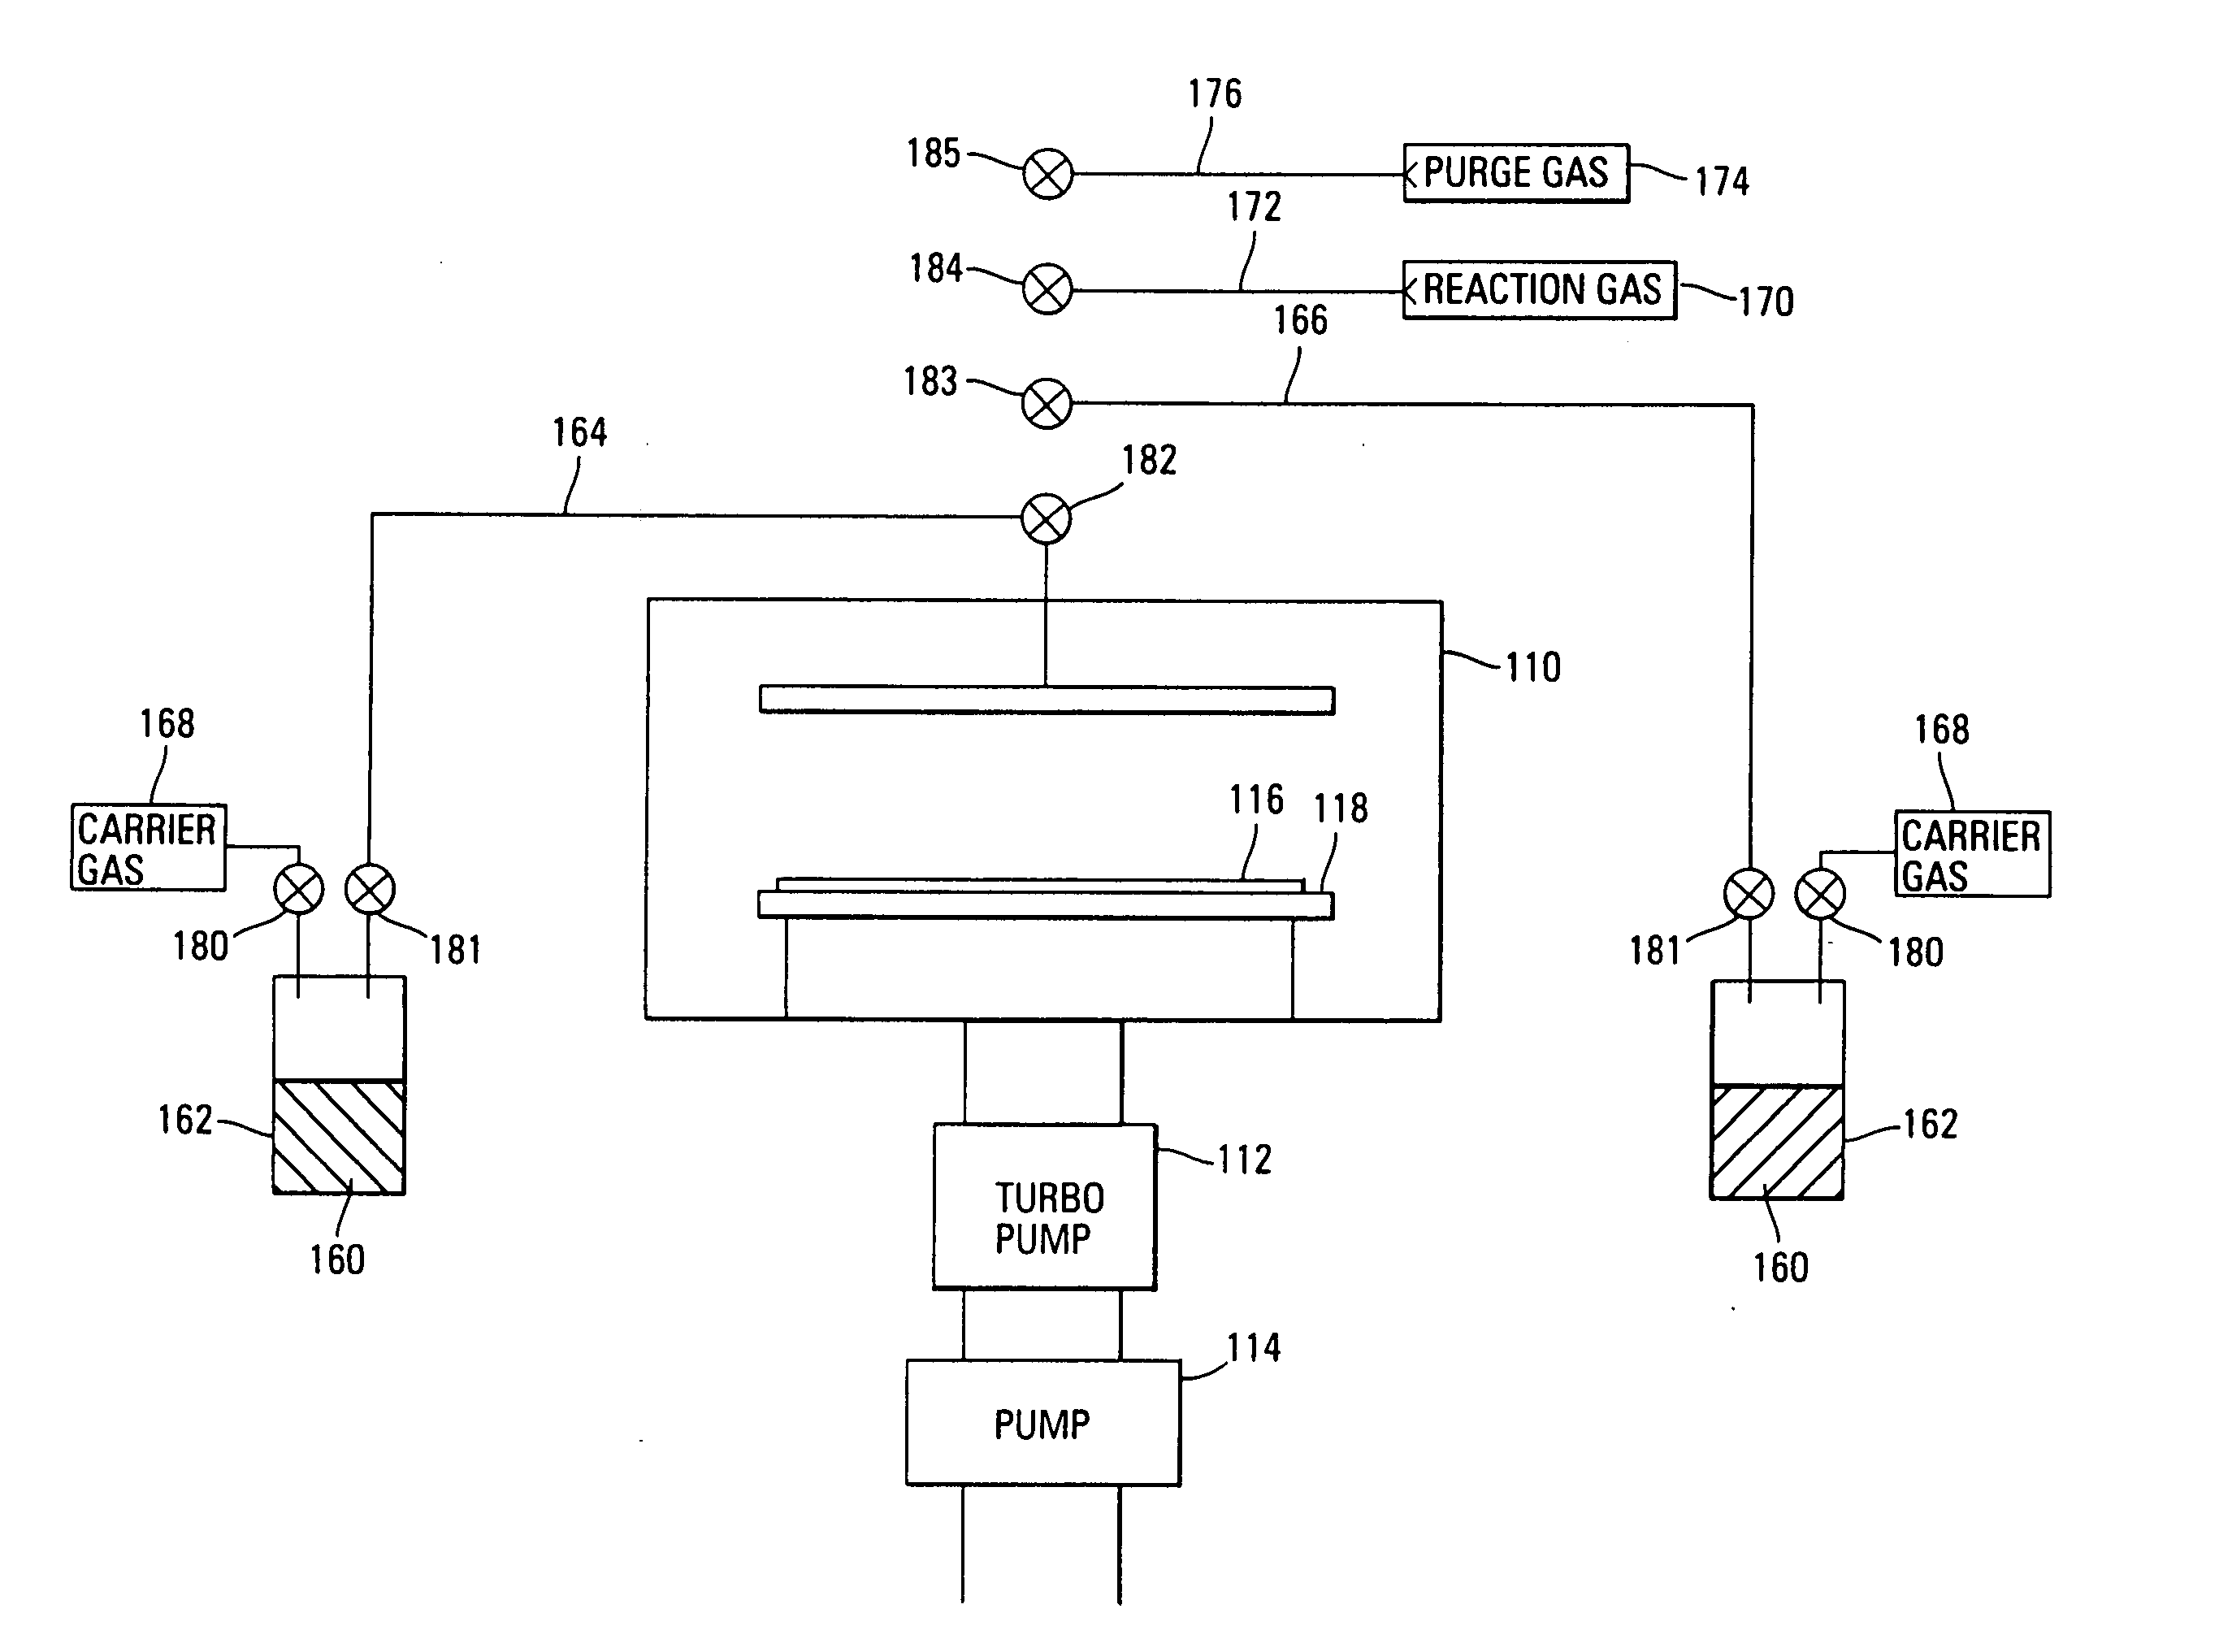 Systems and methods of forming refractory metal nitride layers using disilazanes